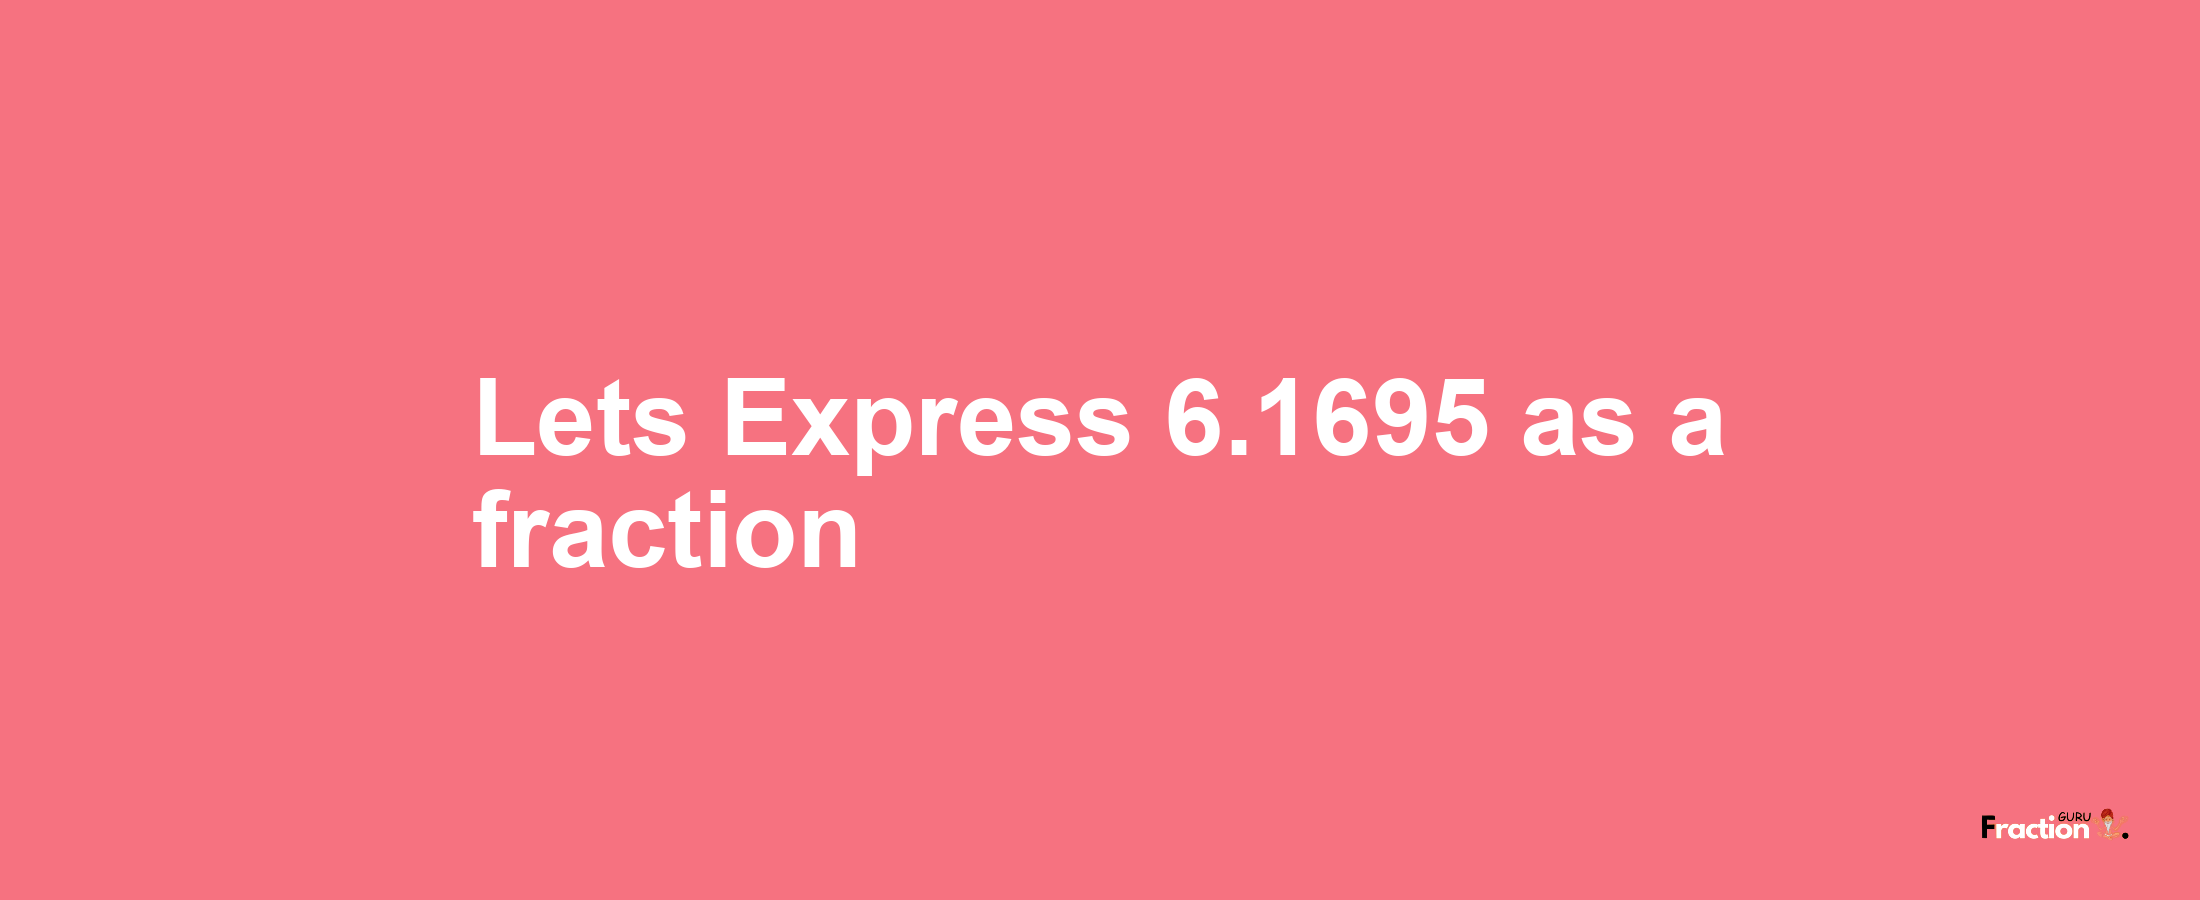 Lets Express 6.1695 as afraction